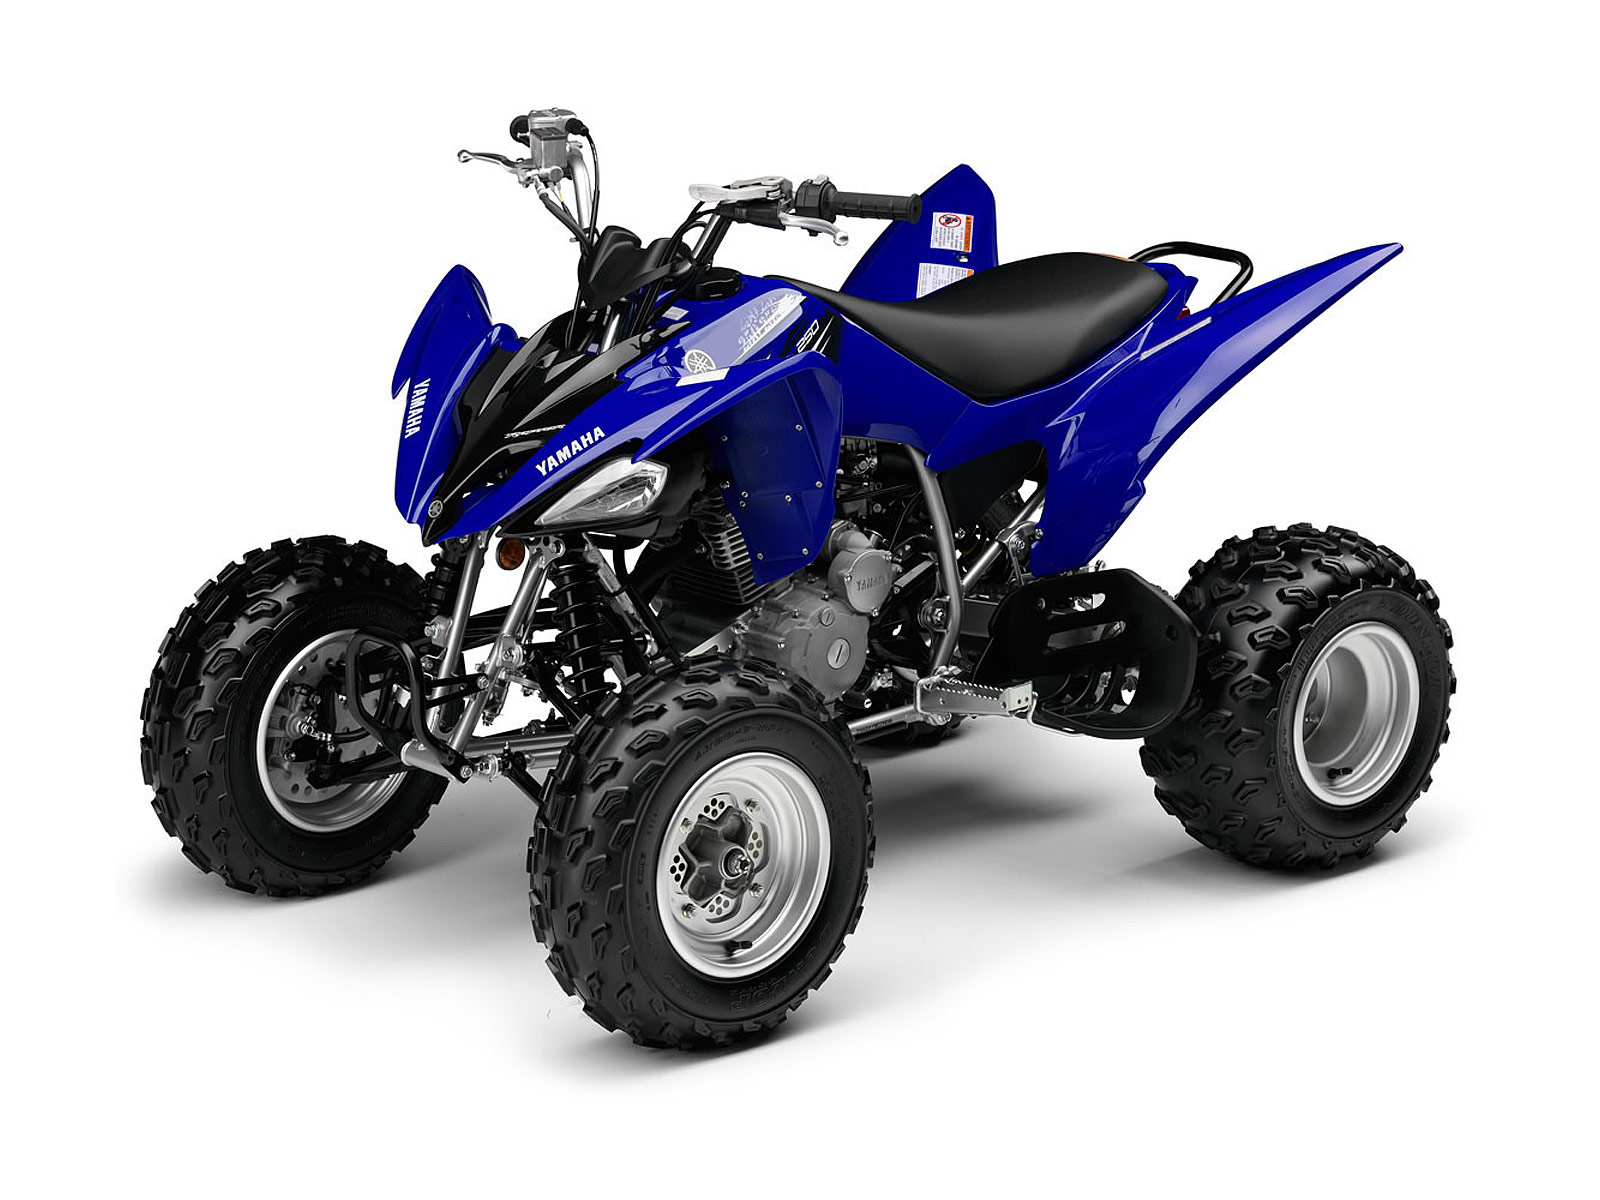 2012 YAMAHA Raptor 250 ATV pictures, review, specifications